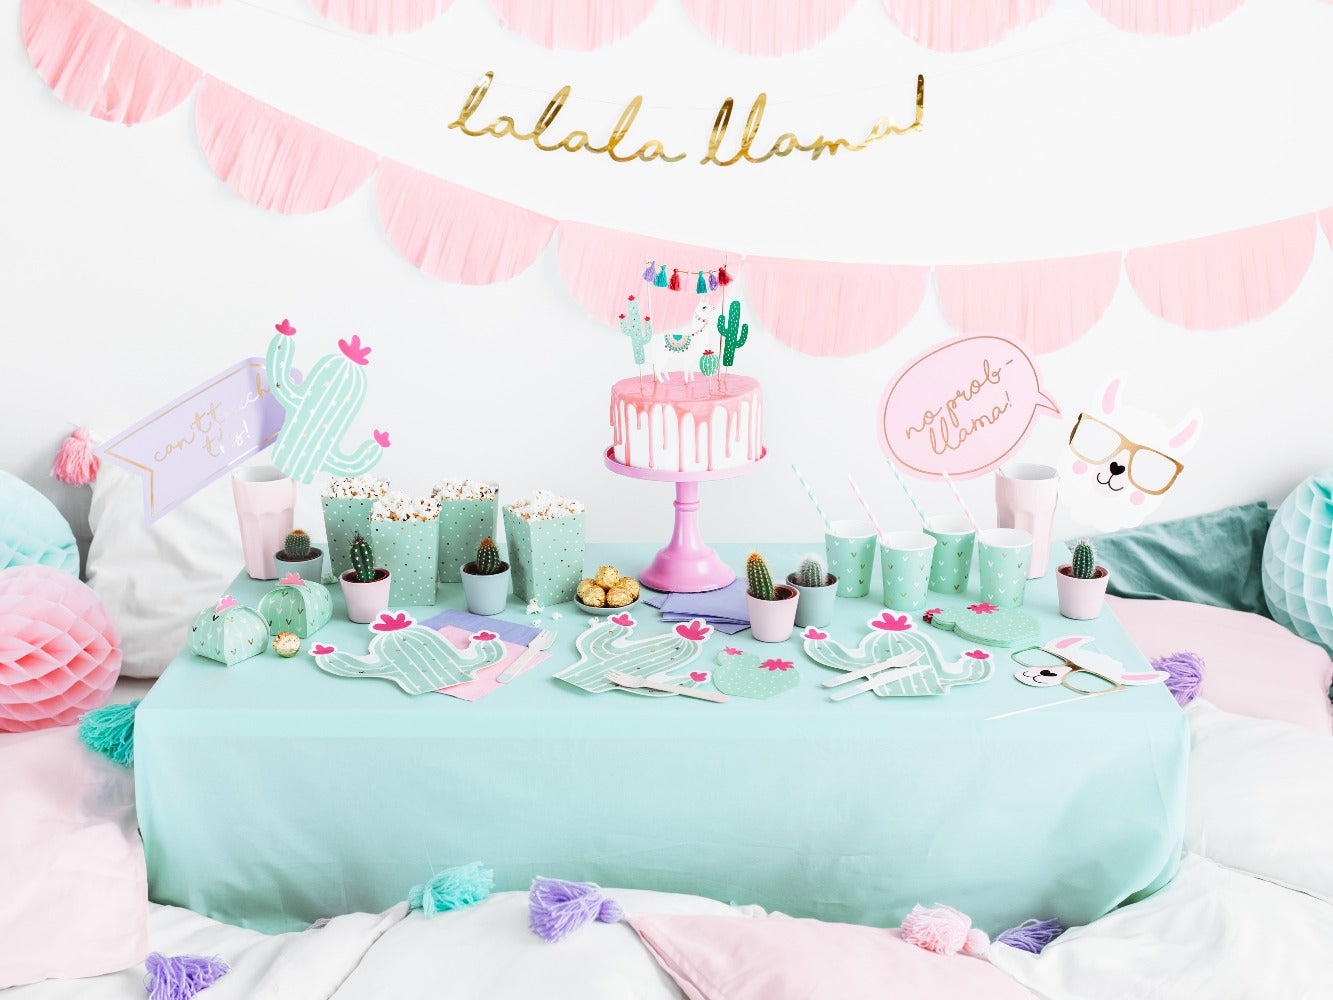 Boho Llama party decorations with gold llama garland, mint party cups with gold details, mint coloured cactus shaped plate with hot pink details, straws and napkins.